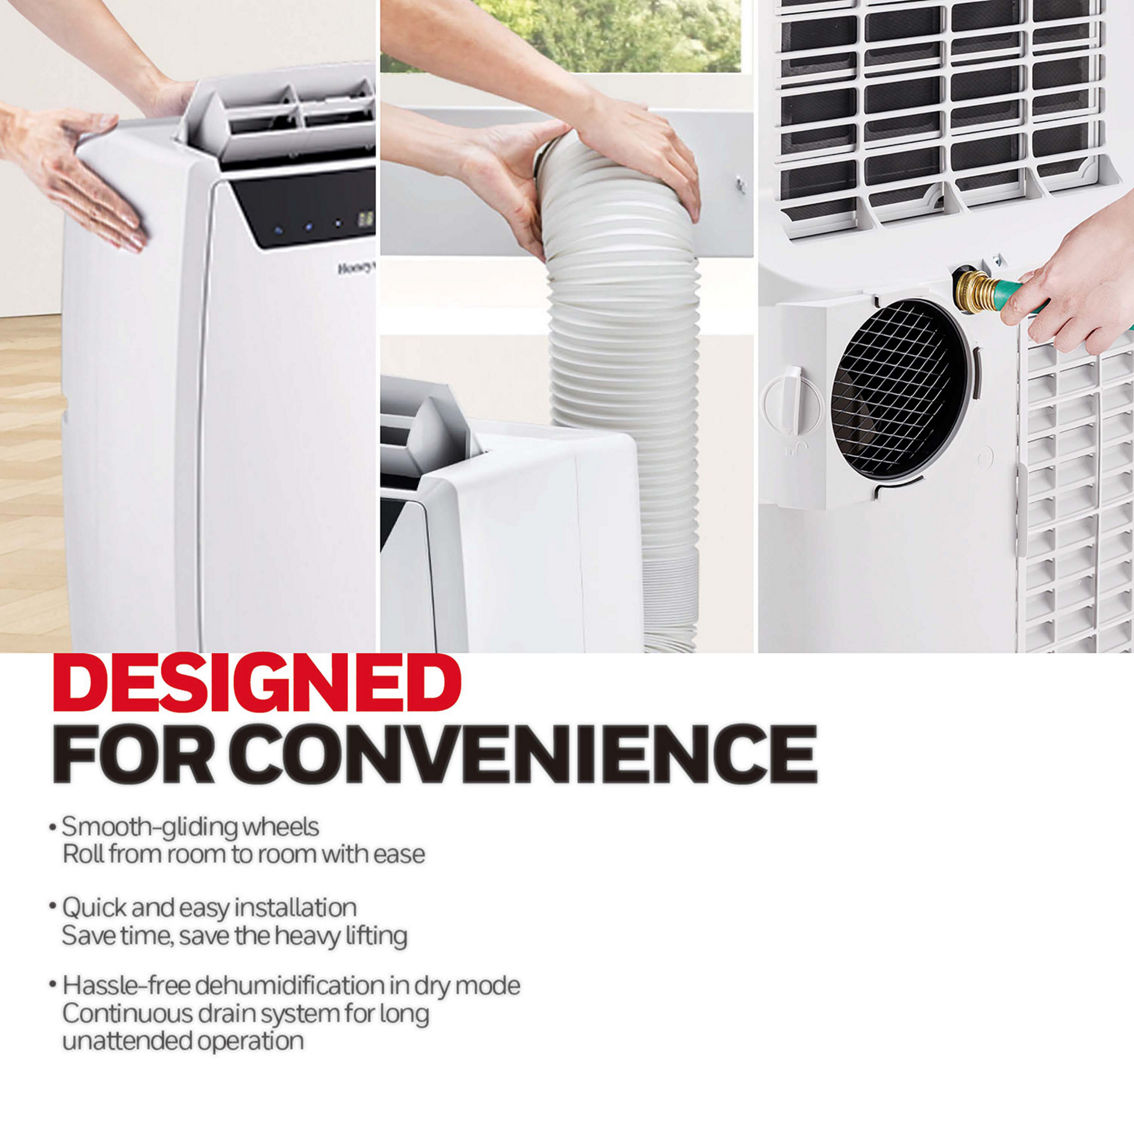 Honeywell 14,000 BTU Portable Air Conditioner, Dehumidifier and Fan - Image 5 of 6